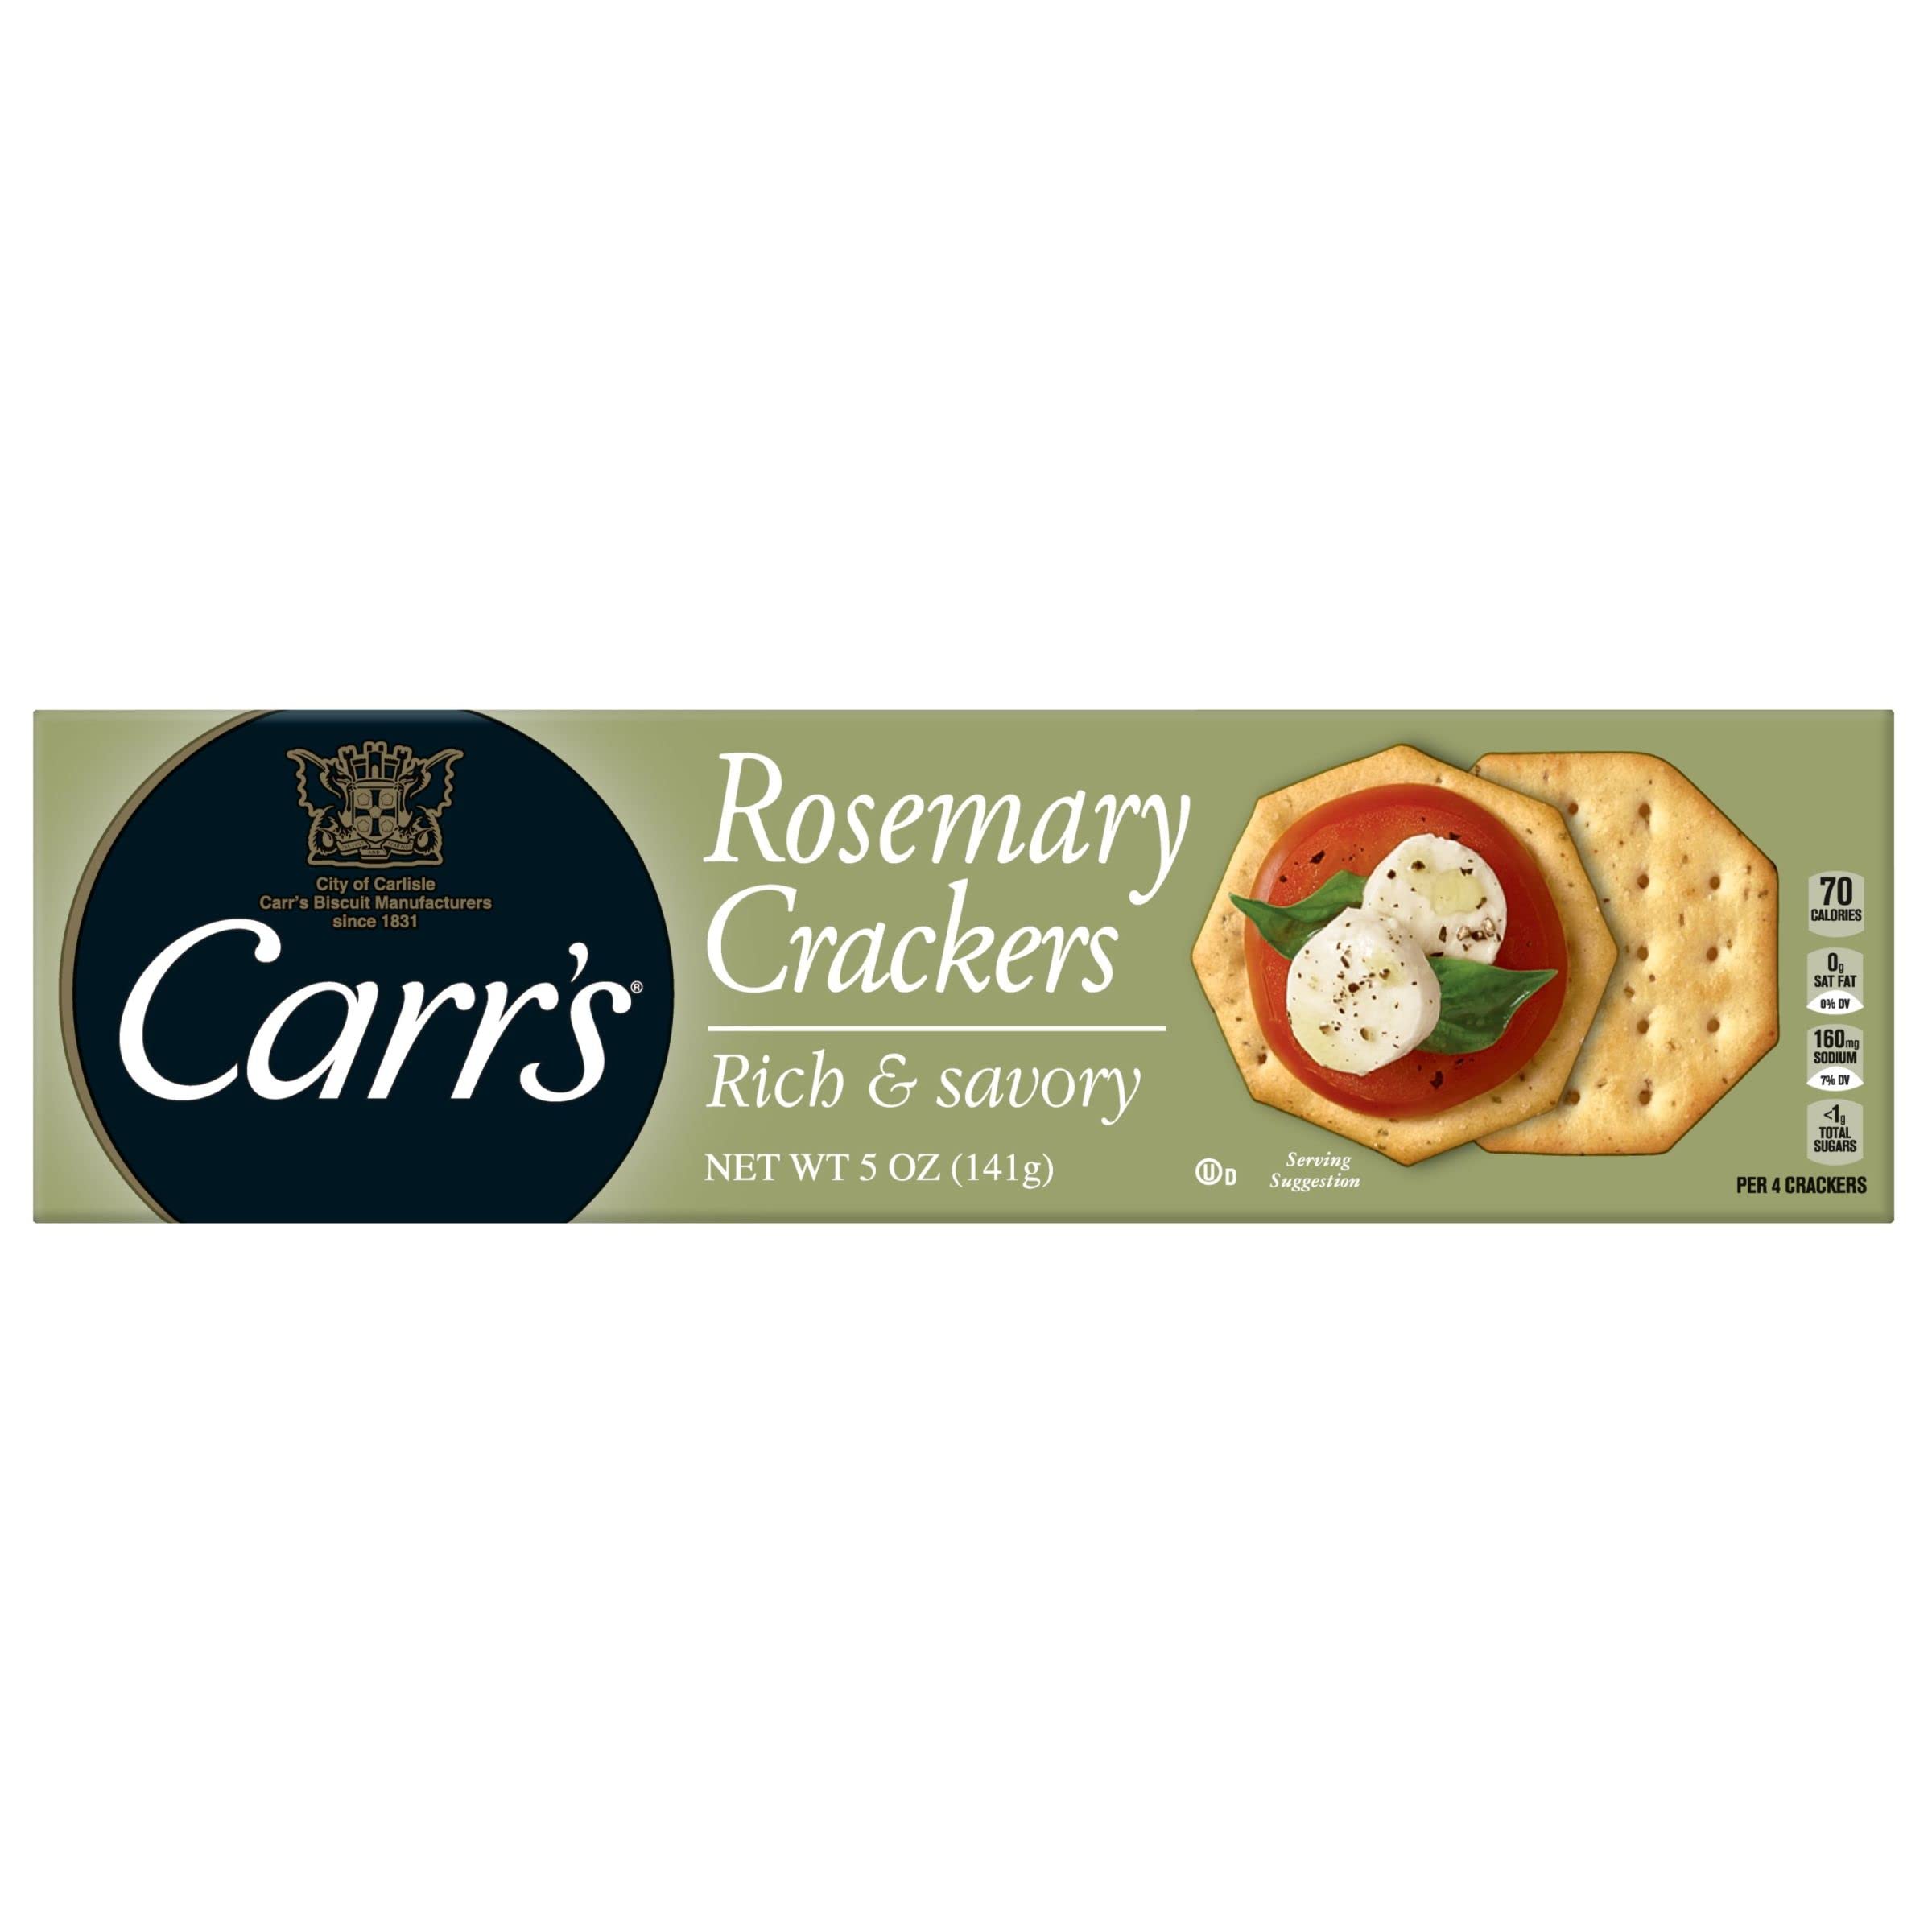 Carr's Rosemary Crackers 4.5oz 12ct